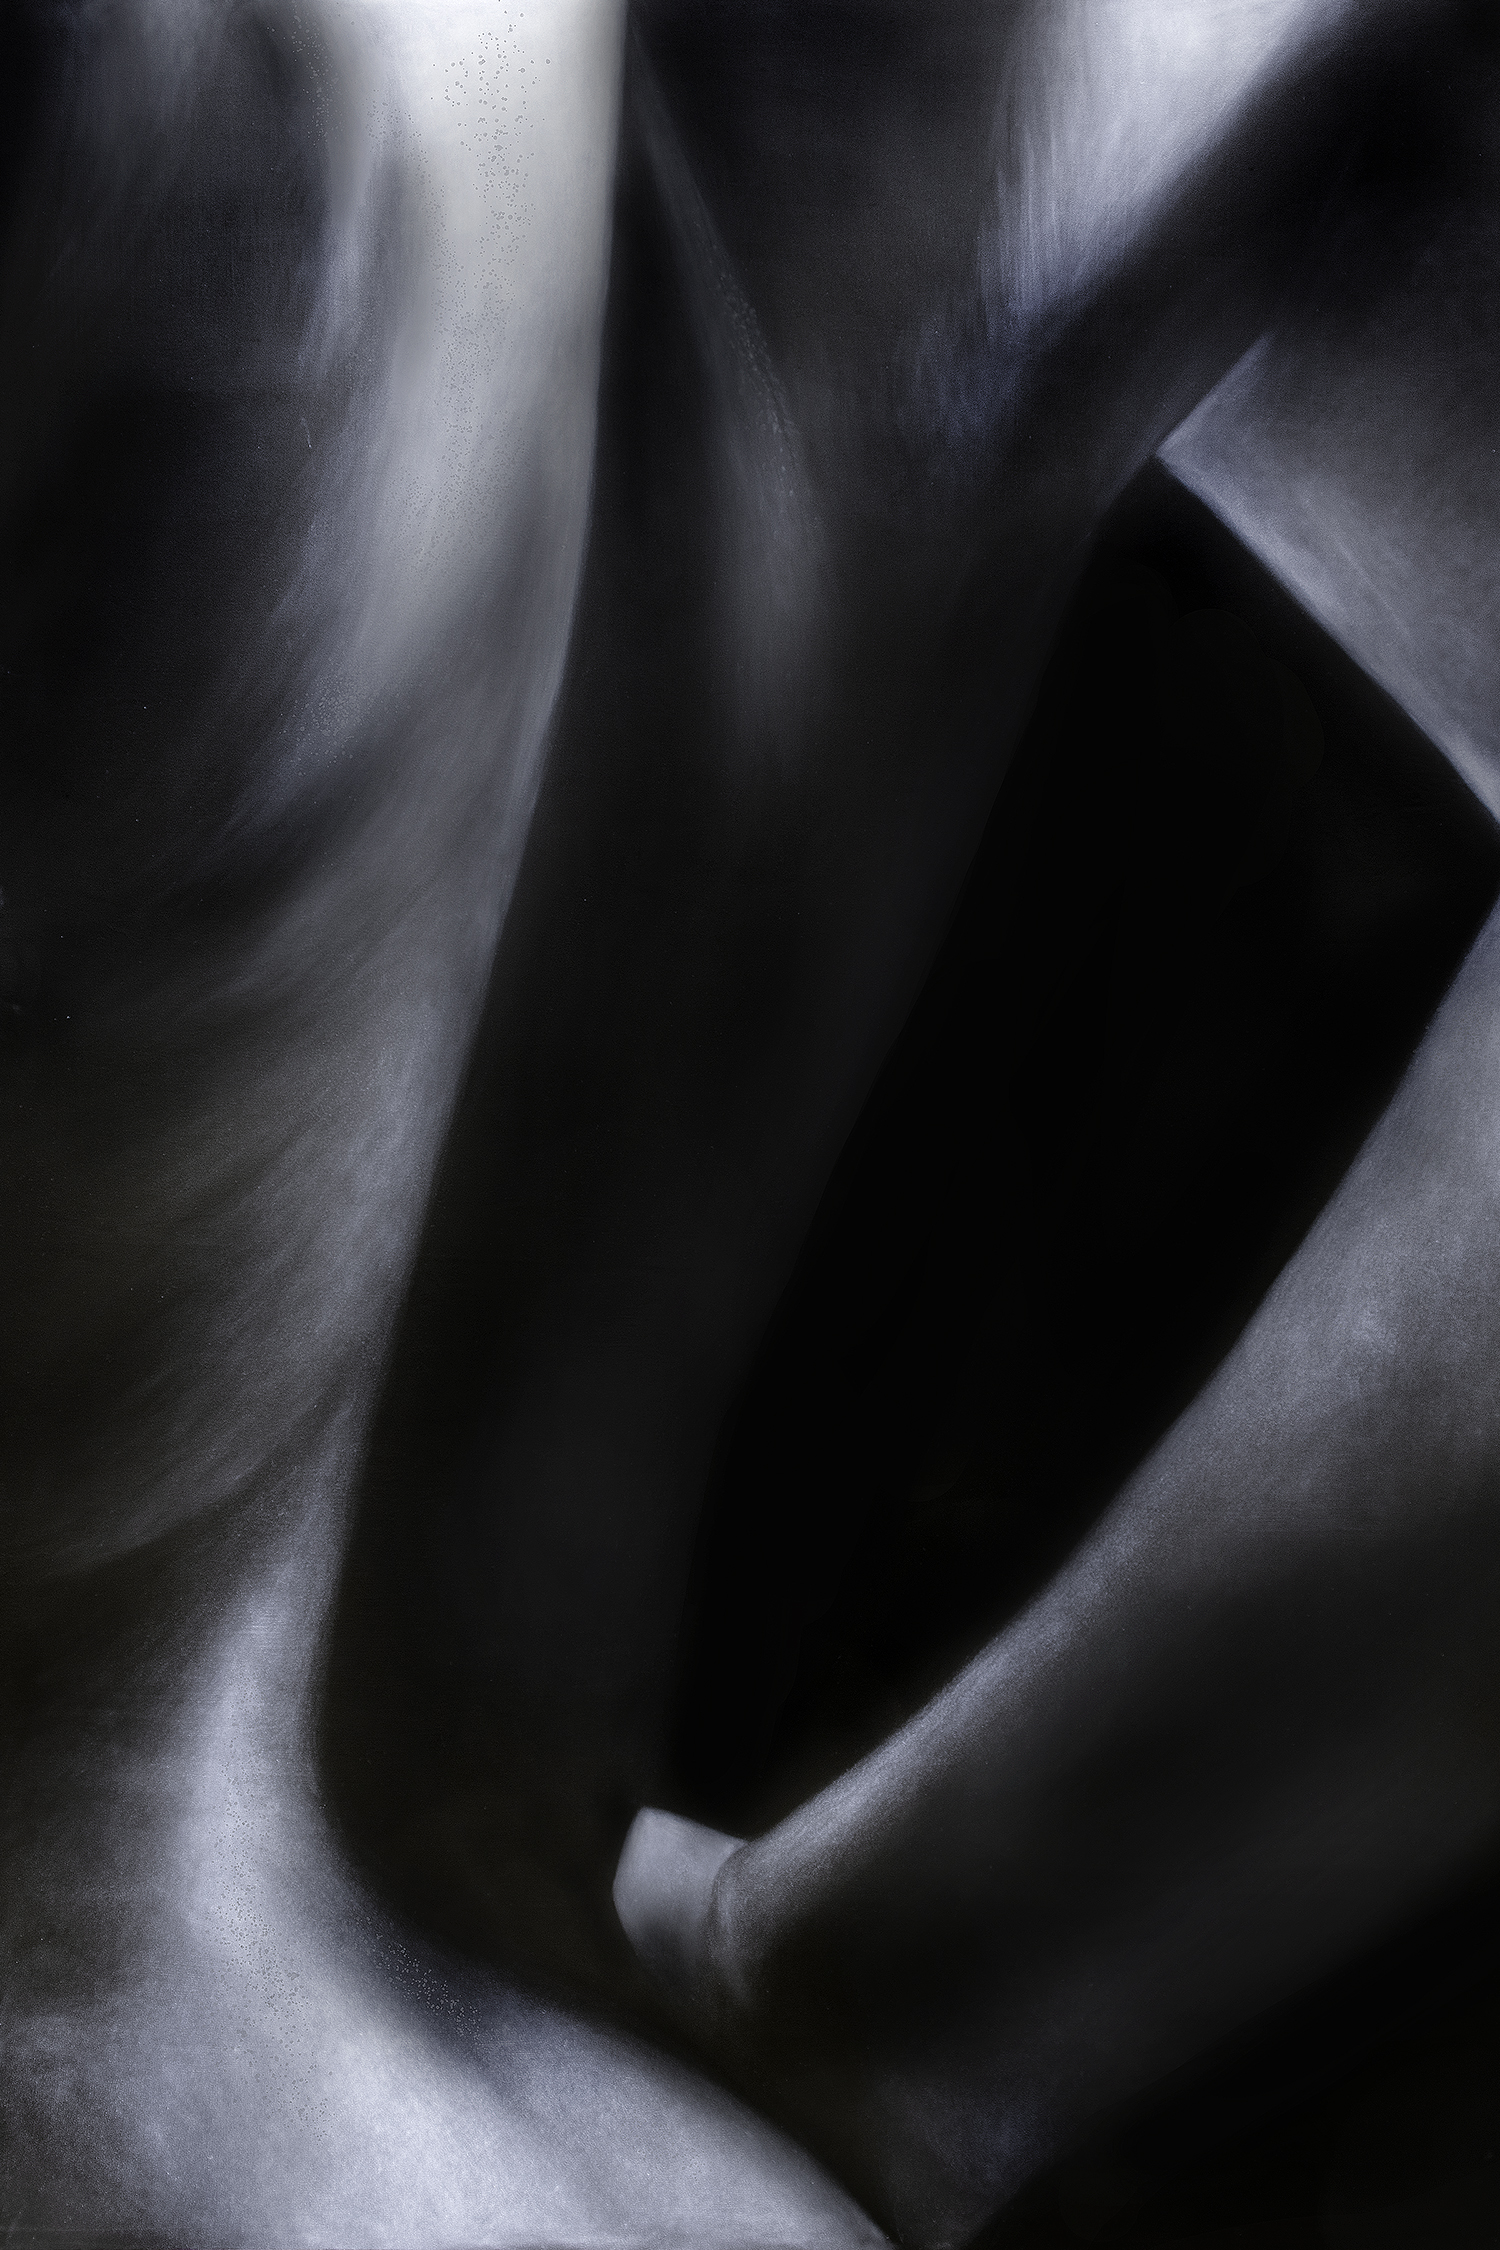 A closely cropped image of a figure’s back and arm, hand on hip, surrounded by harsh shadows. Features skin texture and underlying muscle structures.